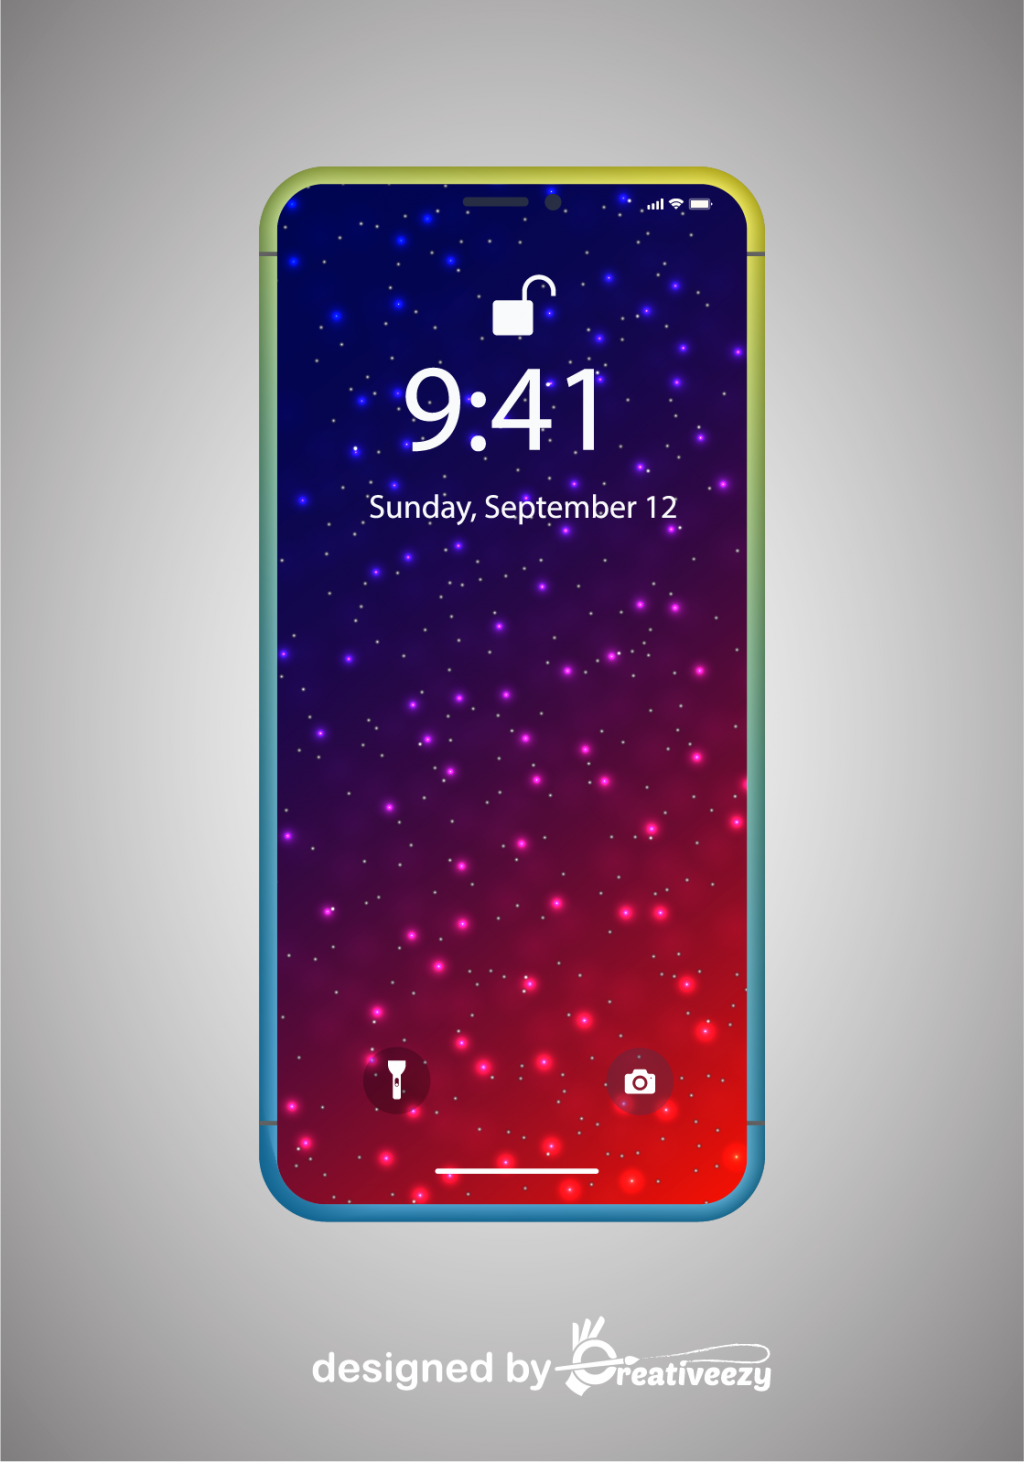 Colourful Dark Sky Mobile Wallpapers blue purple red Screen Cover Lock Screen